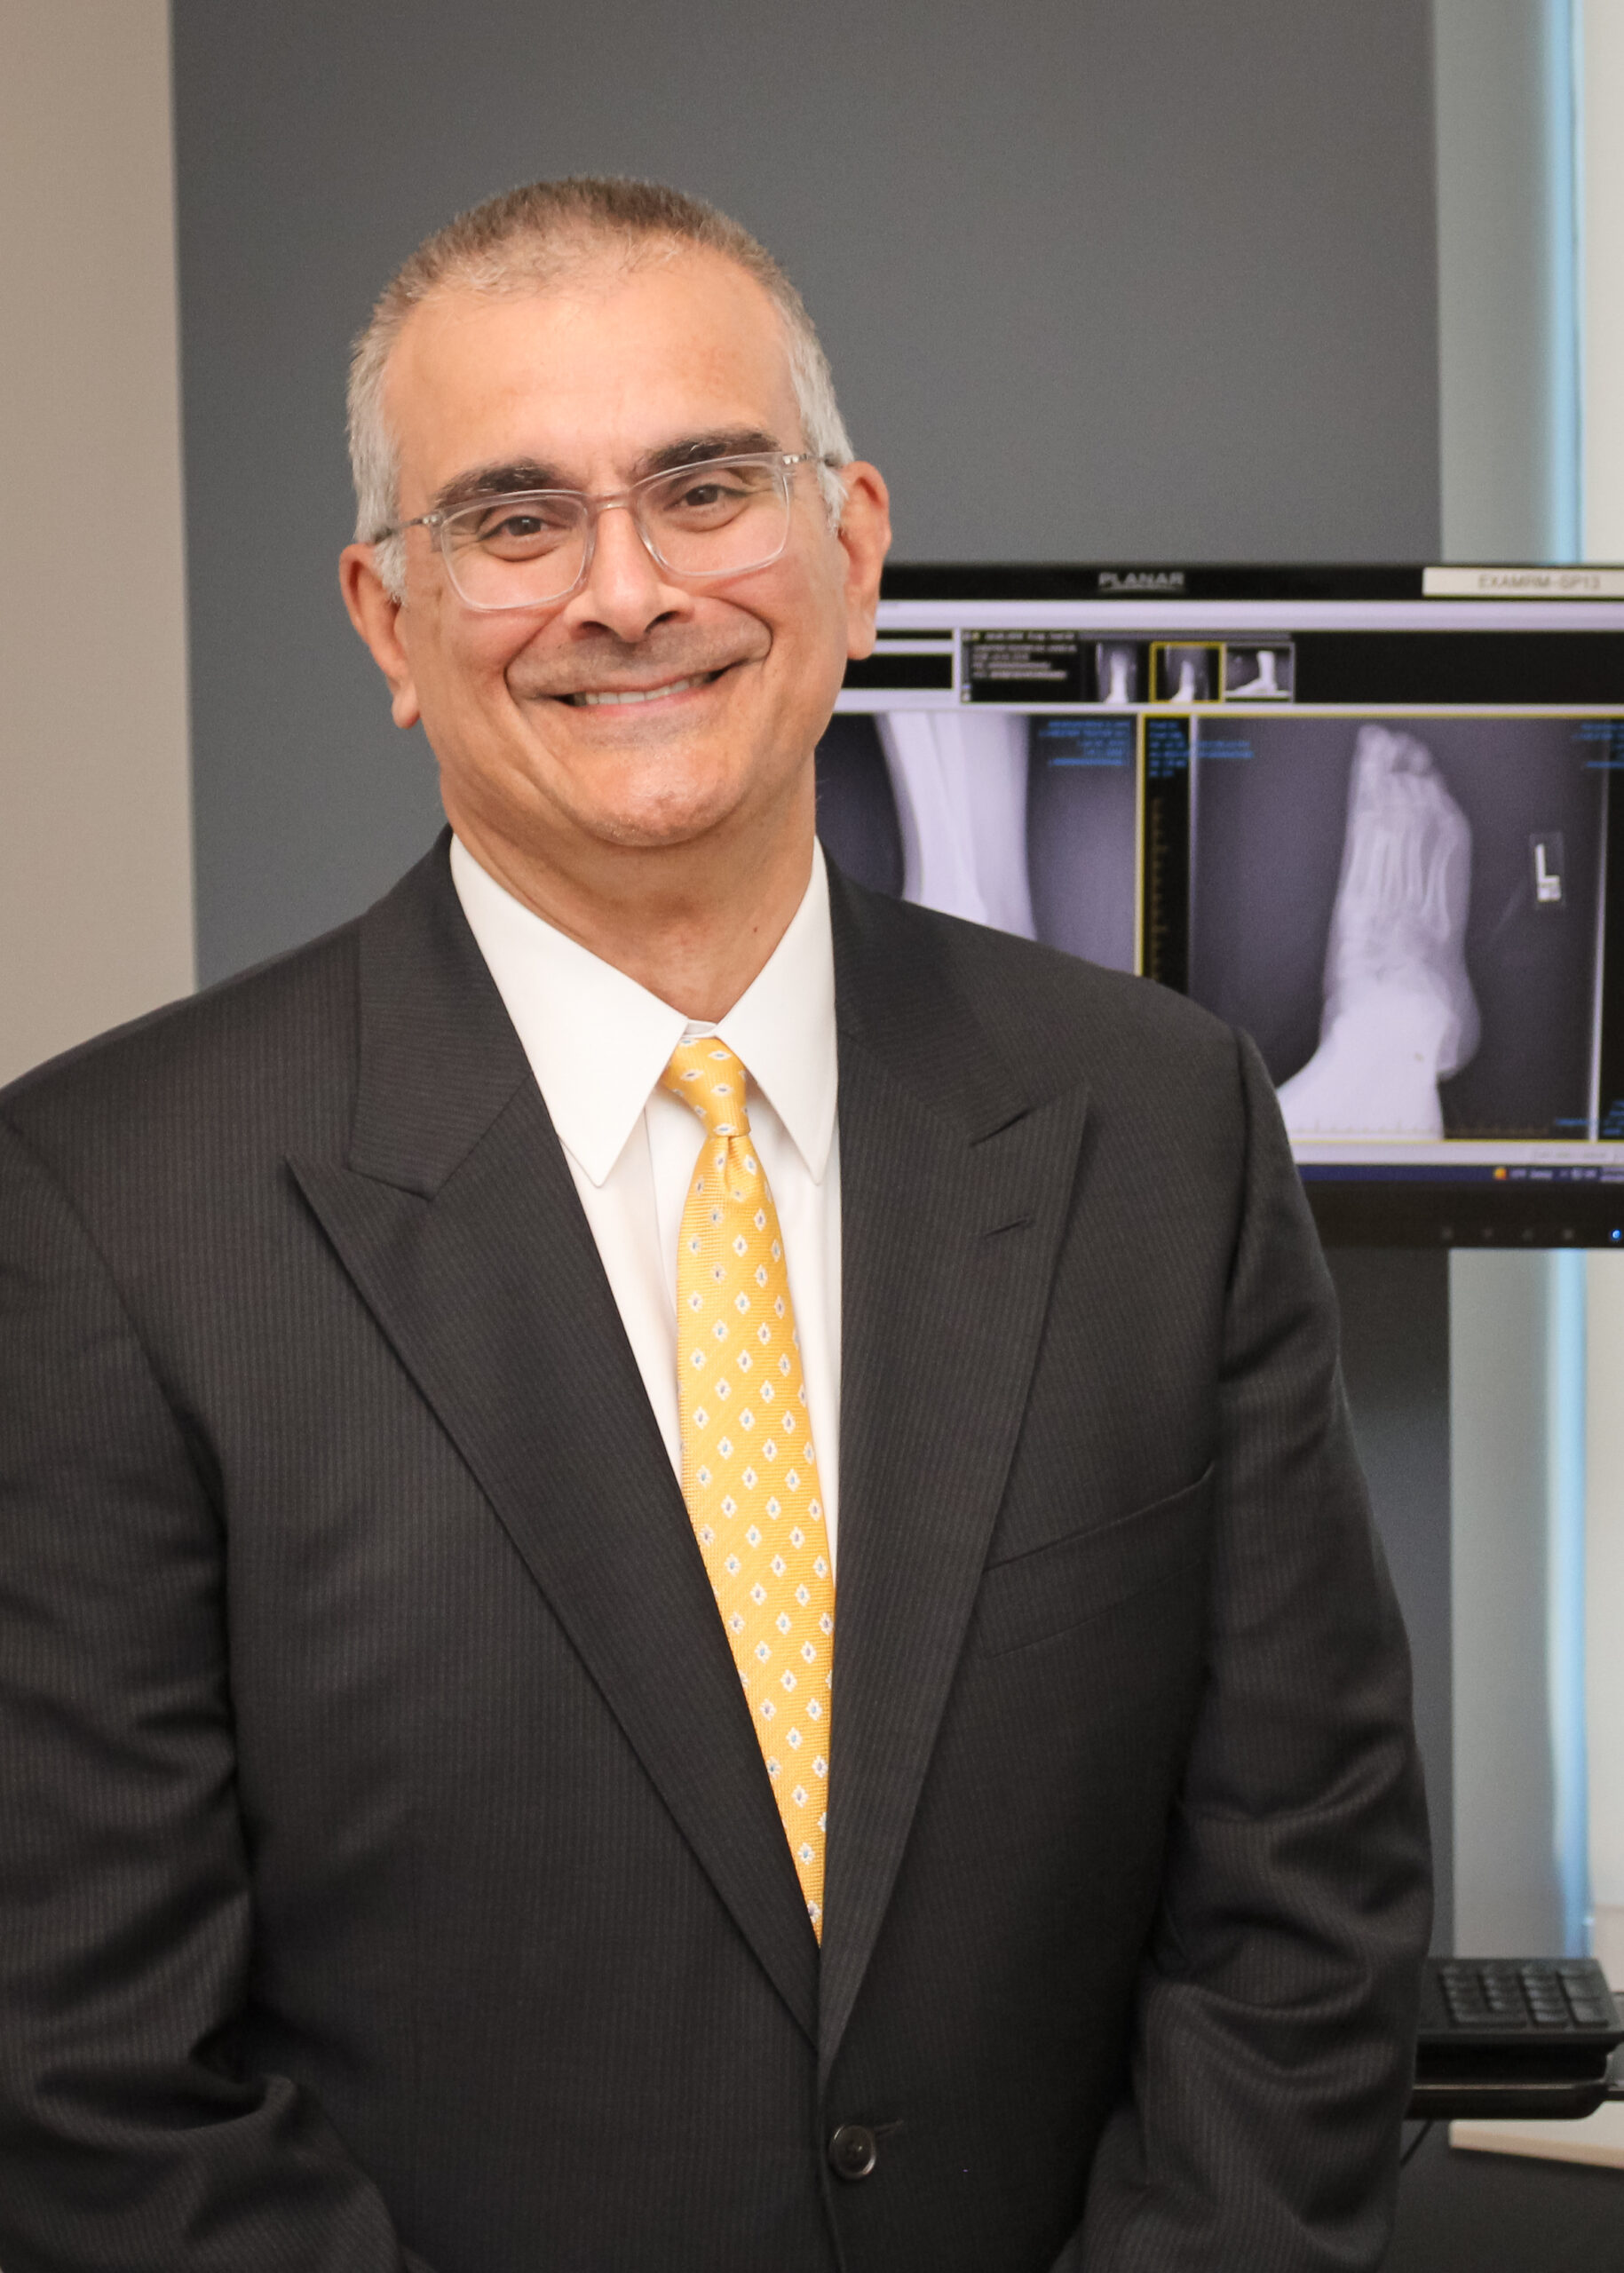 Advanced Bone & Joint - Dr. Anthony Lombardo - Foot surgery - Ankle Surgery - Podiatrist St. Peters & O'Fallon, MO - foot pain - ankle pain - foot surgeon - diabetic feet